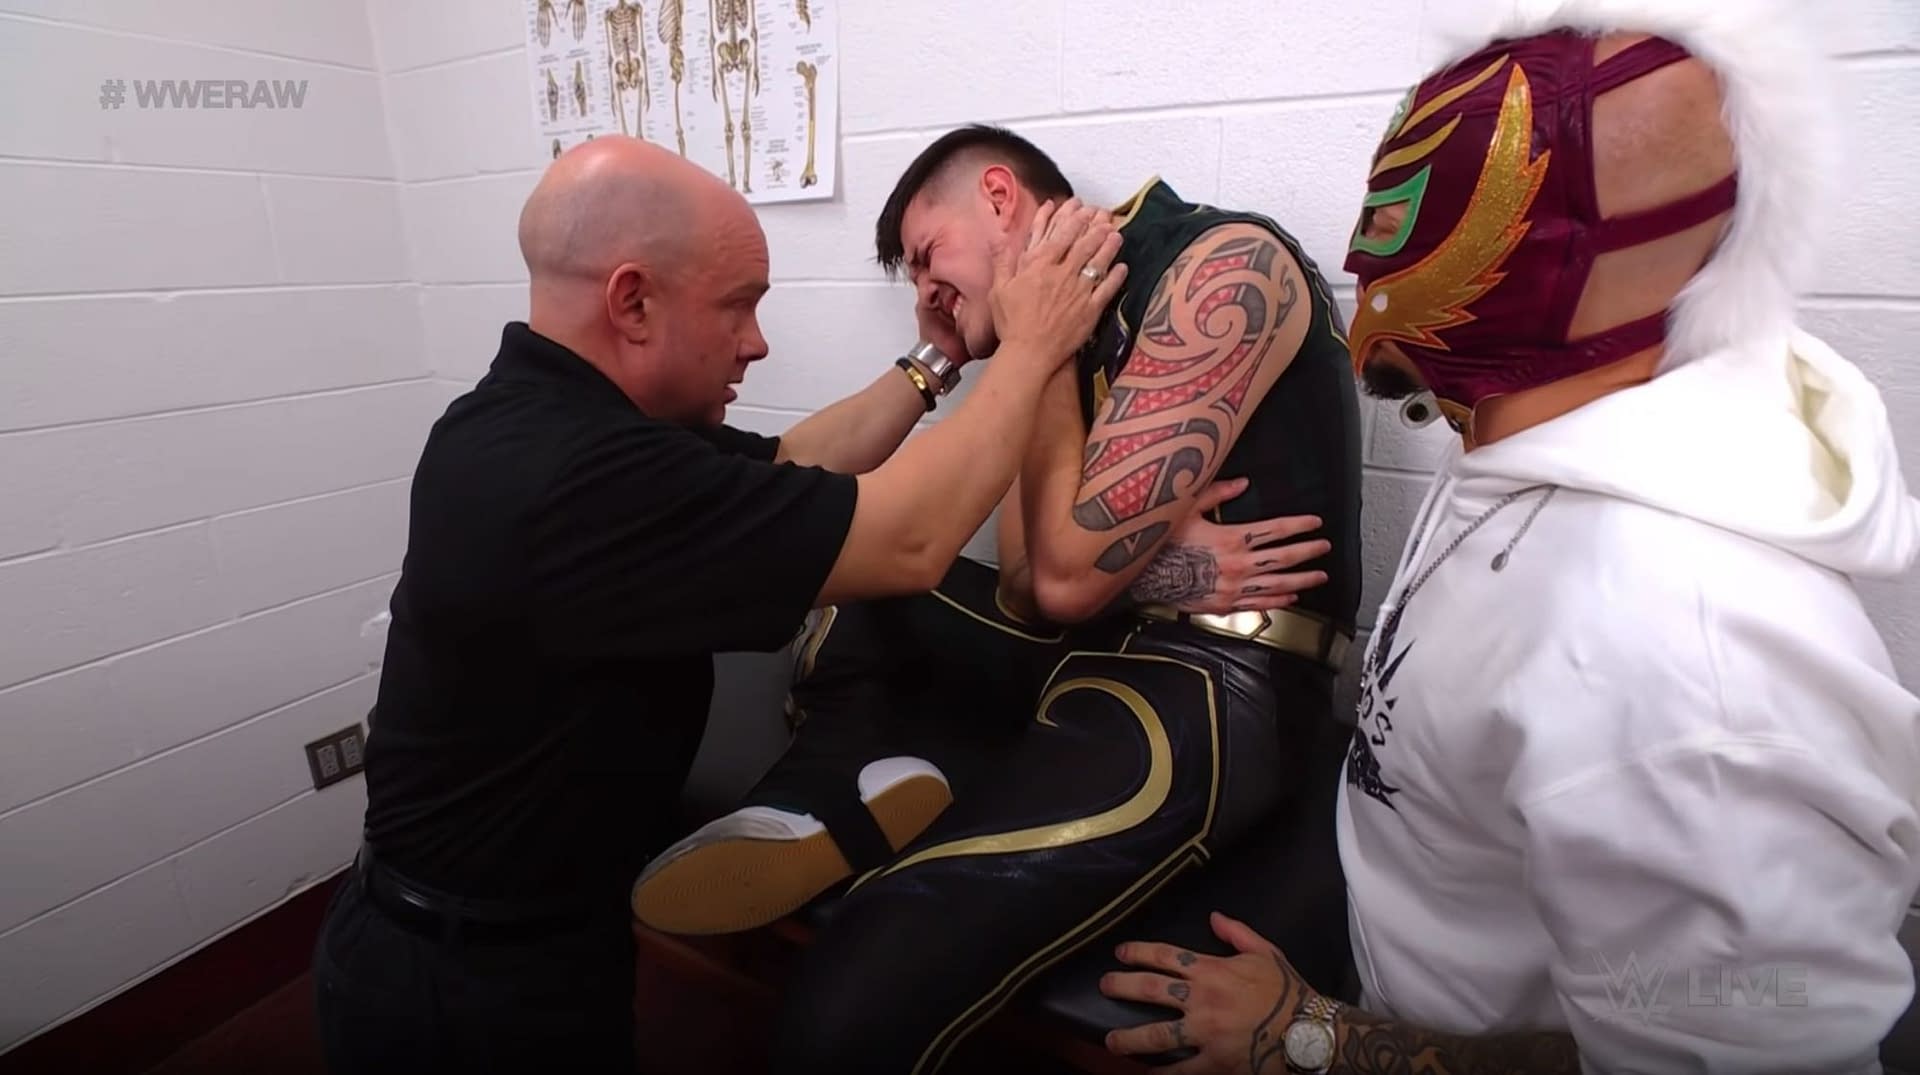 By Booking Him as a Loser, WWE is Setting Up Dominik Mysterio to